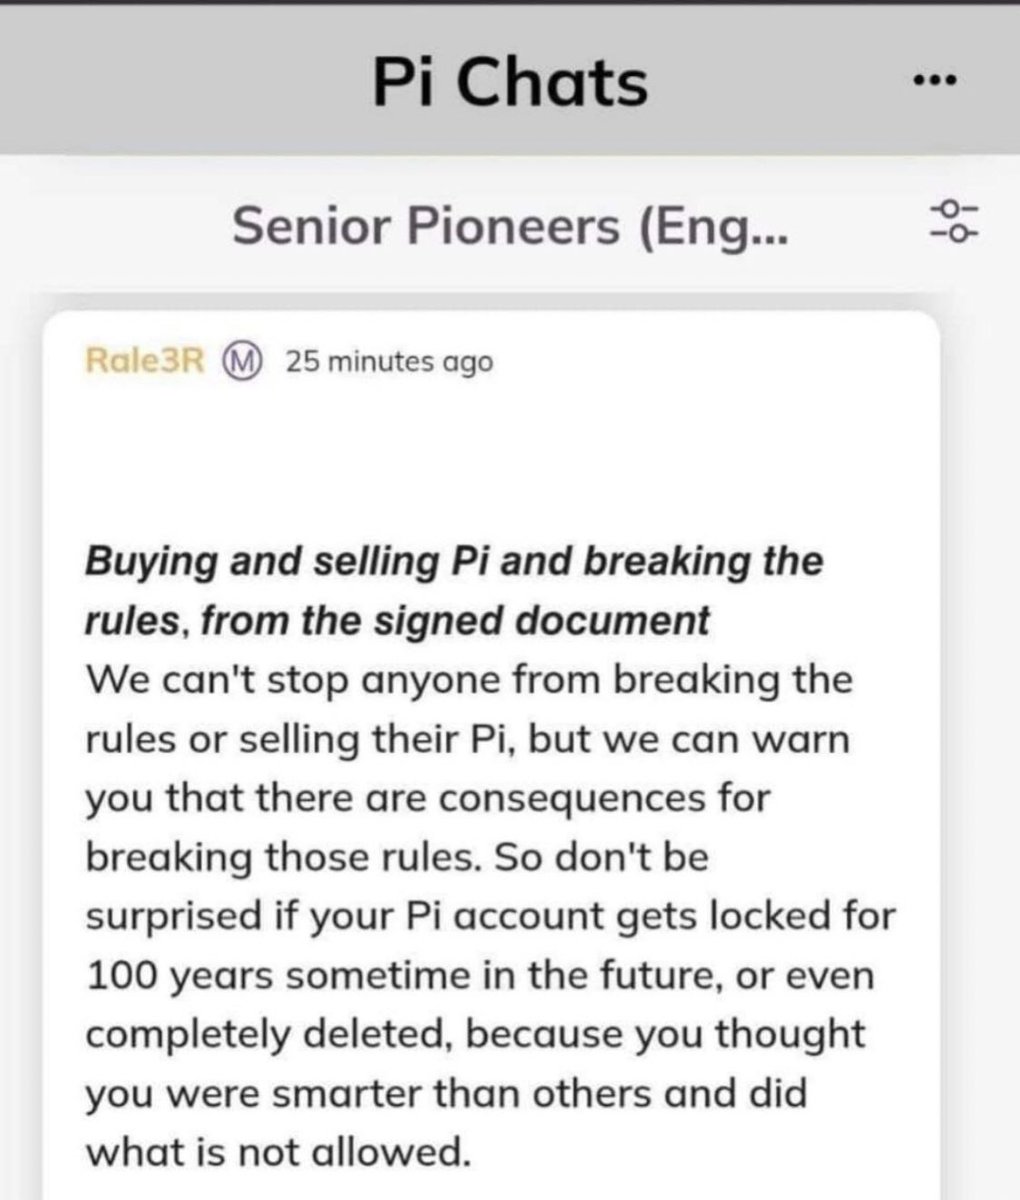 ⛔️Warning: Buying or selling Pi and violating rules may lead to account suspension for up to 100 years or permanent deletion. @PiCoreTeam